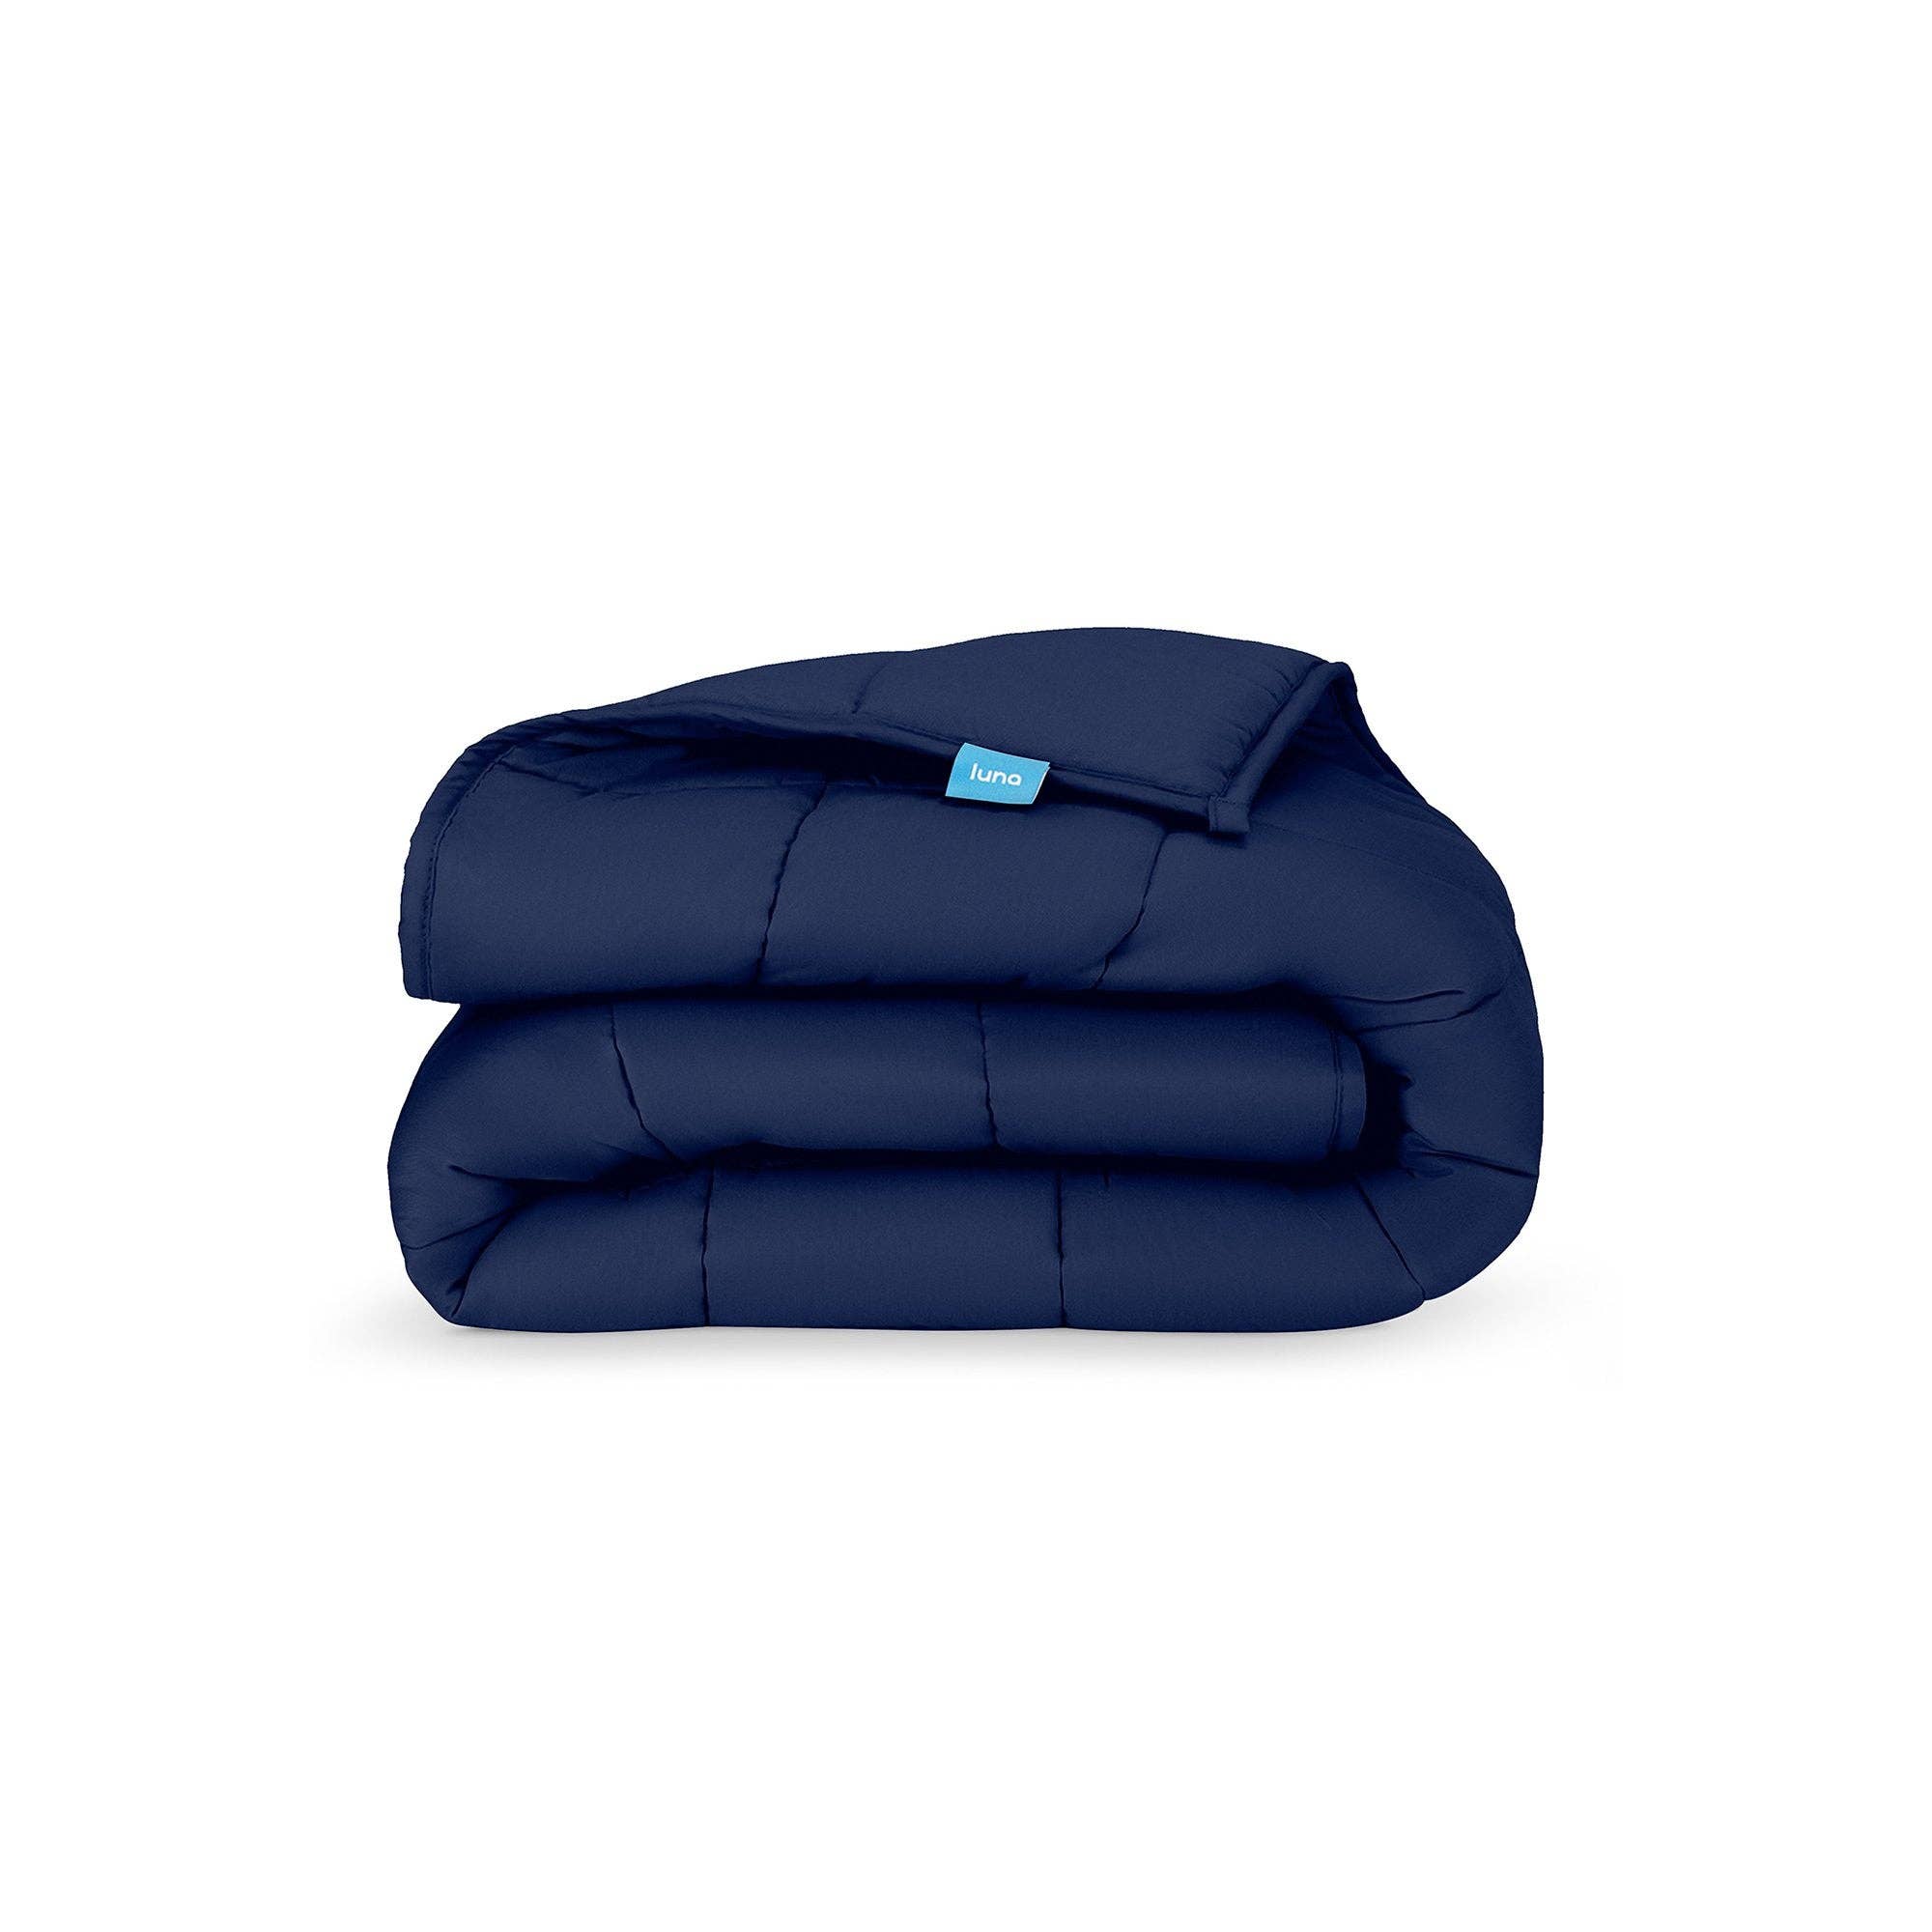 The navy 5 lb Weighted Blanket.